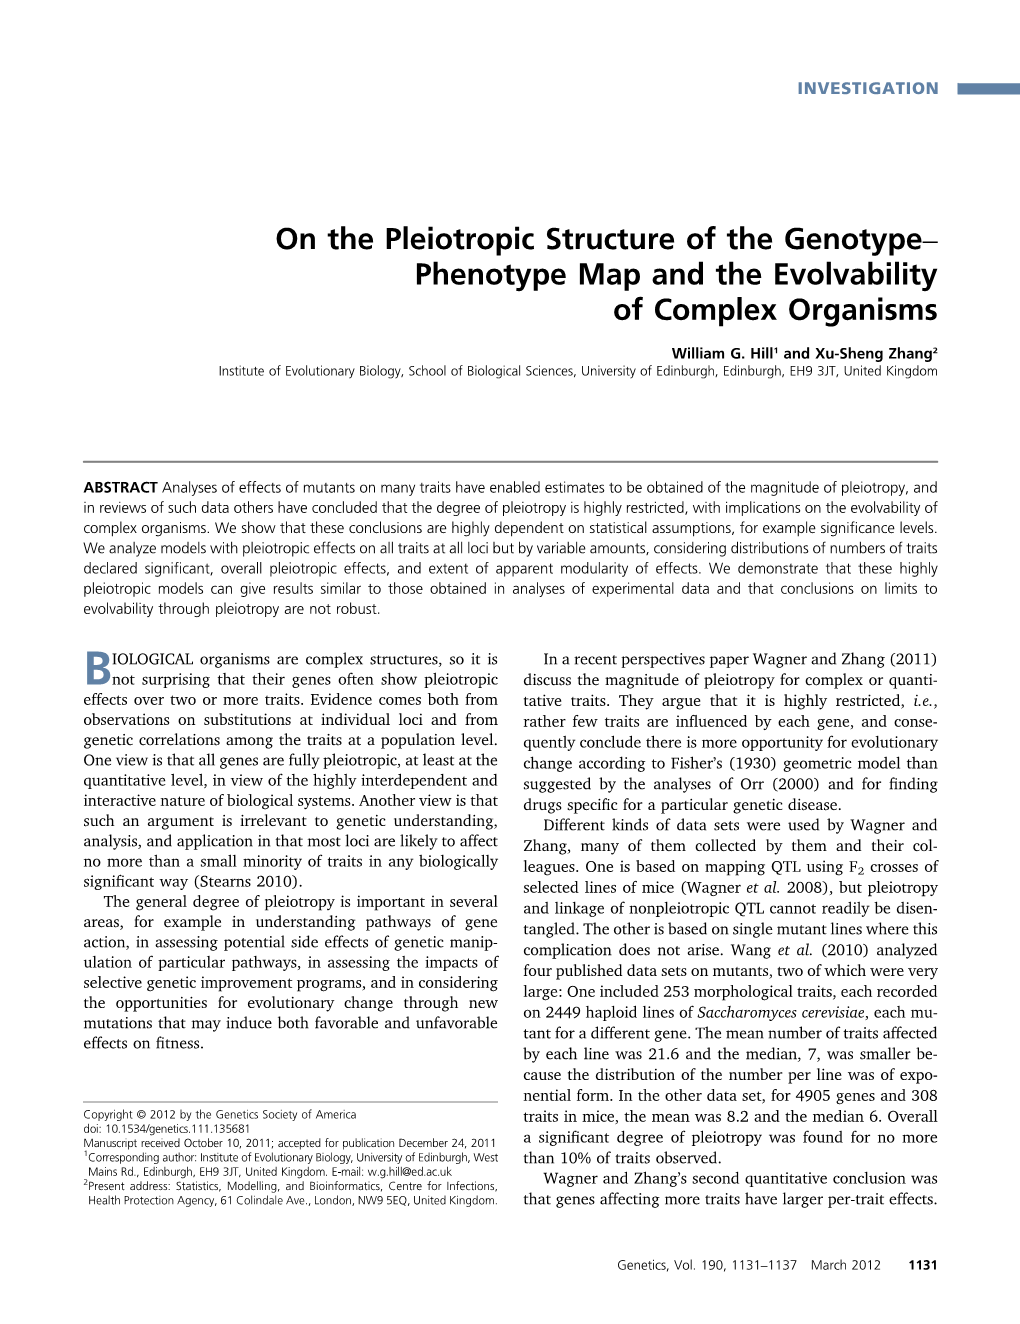 On the Pleiotropic Structure of the Genotype– Phenotype Map and the Evolvability of Complex Organisms